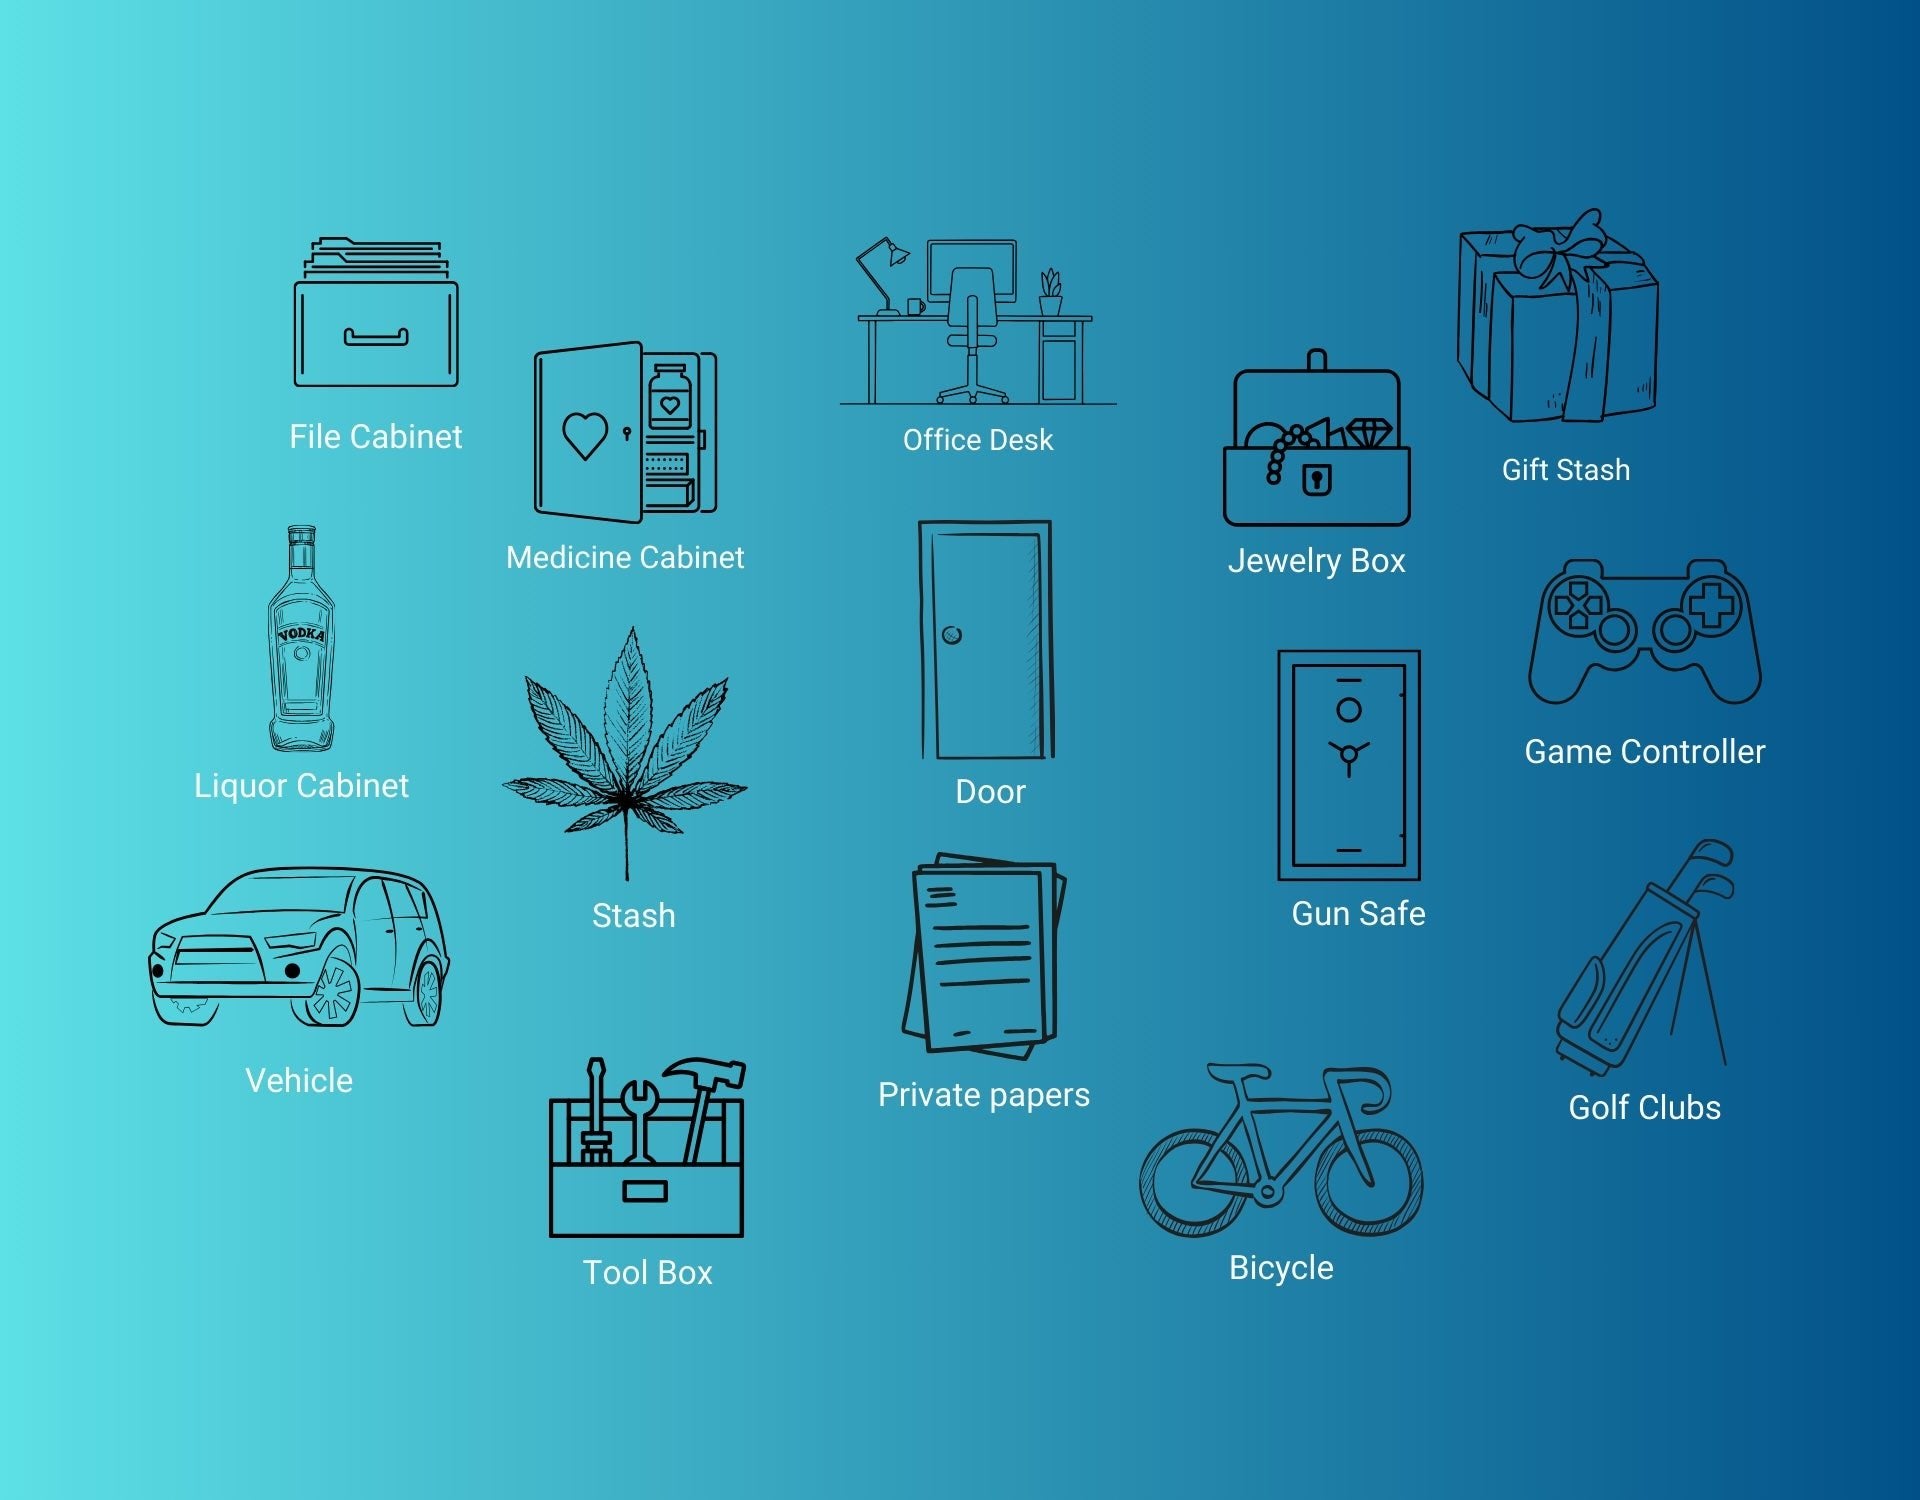 Graphic of the many place to use Kini Wireless Motion Sensor- File Cabinet, Medicine Cabinet, Office Desk, Jewelry Box, Gift Stash, Liquor Cabinet, Cannabis, Door, Game Controller, Vehicle, Tool Box, Private Papers, Bicycle, Golf ClubsKini 3-Pack: Wireless Motion Sensor with Realtime SMS Alerts - Kinisium LLC